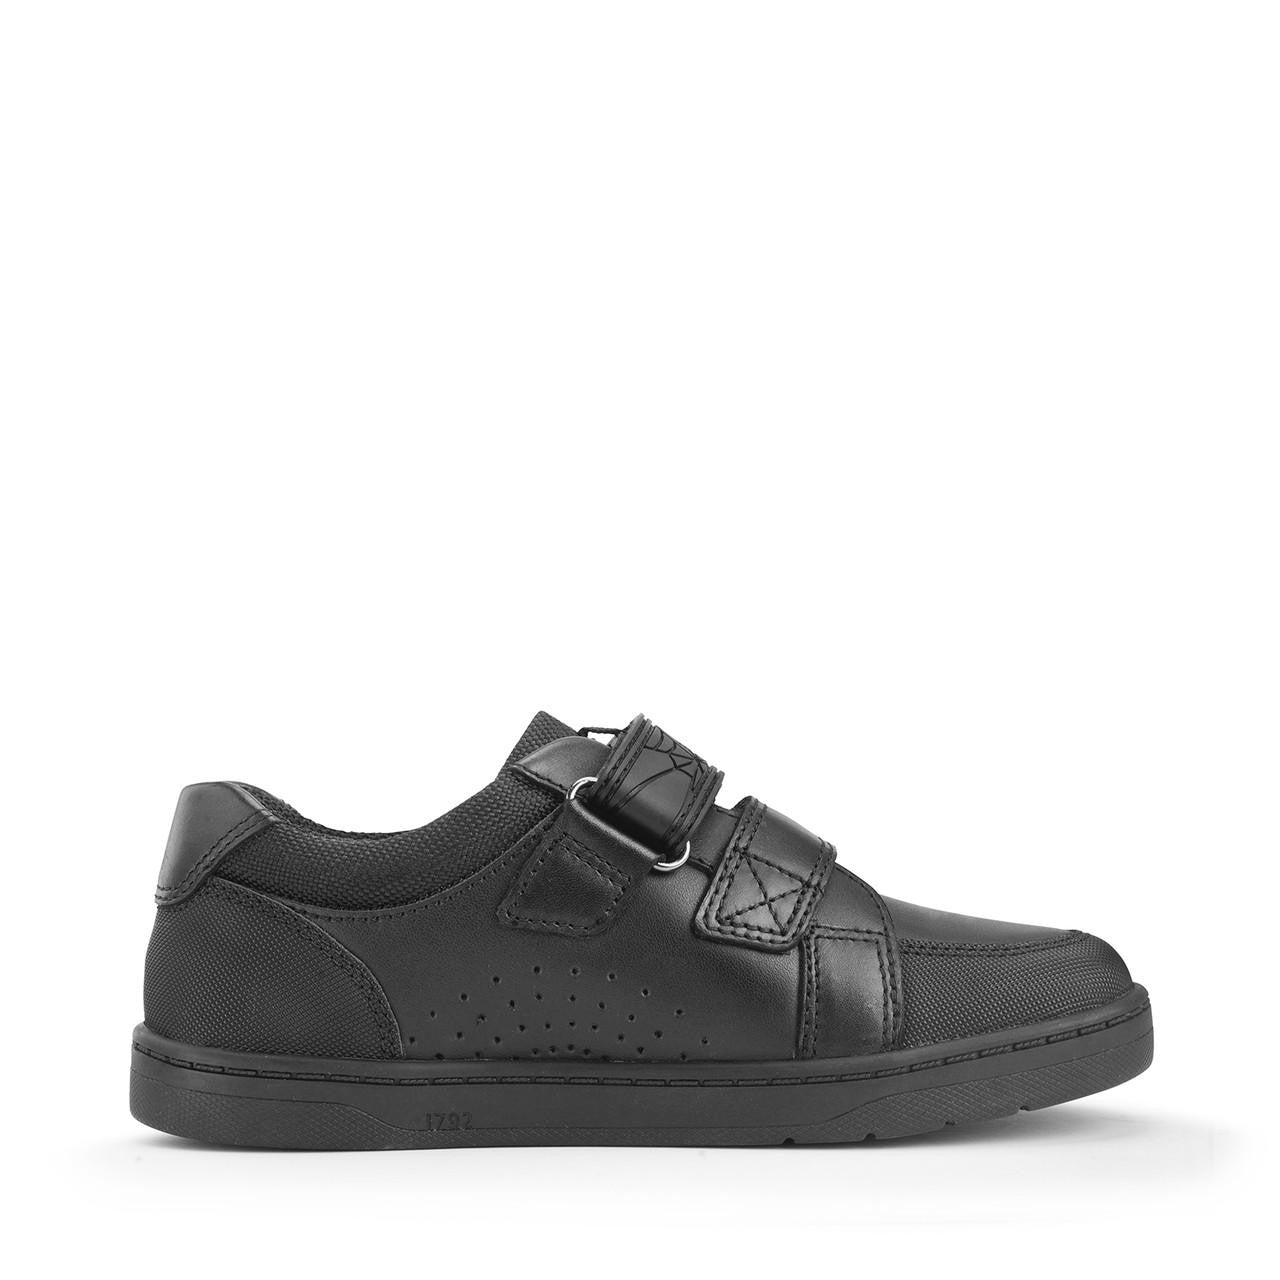 A boys school shoe by Start-Rite, style Spider Web, in black leather with toe bumper and spider motif. Left side view.